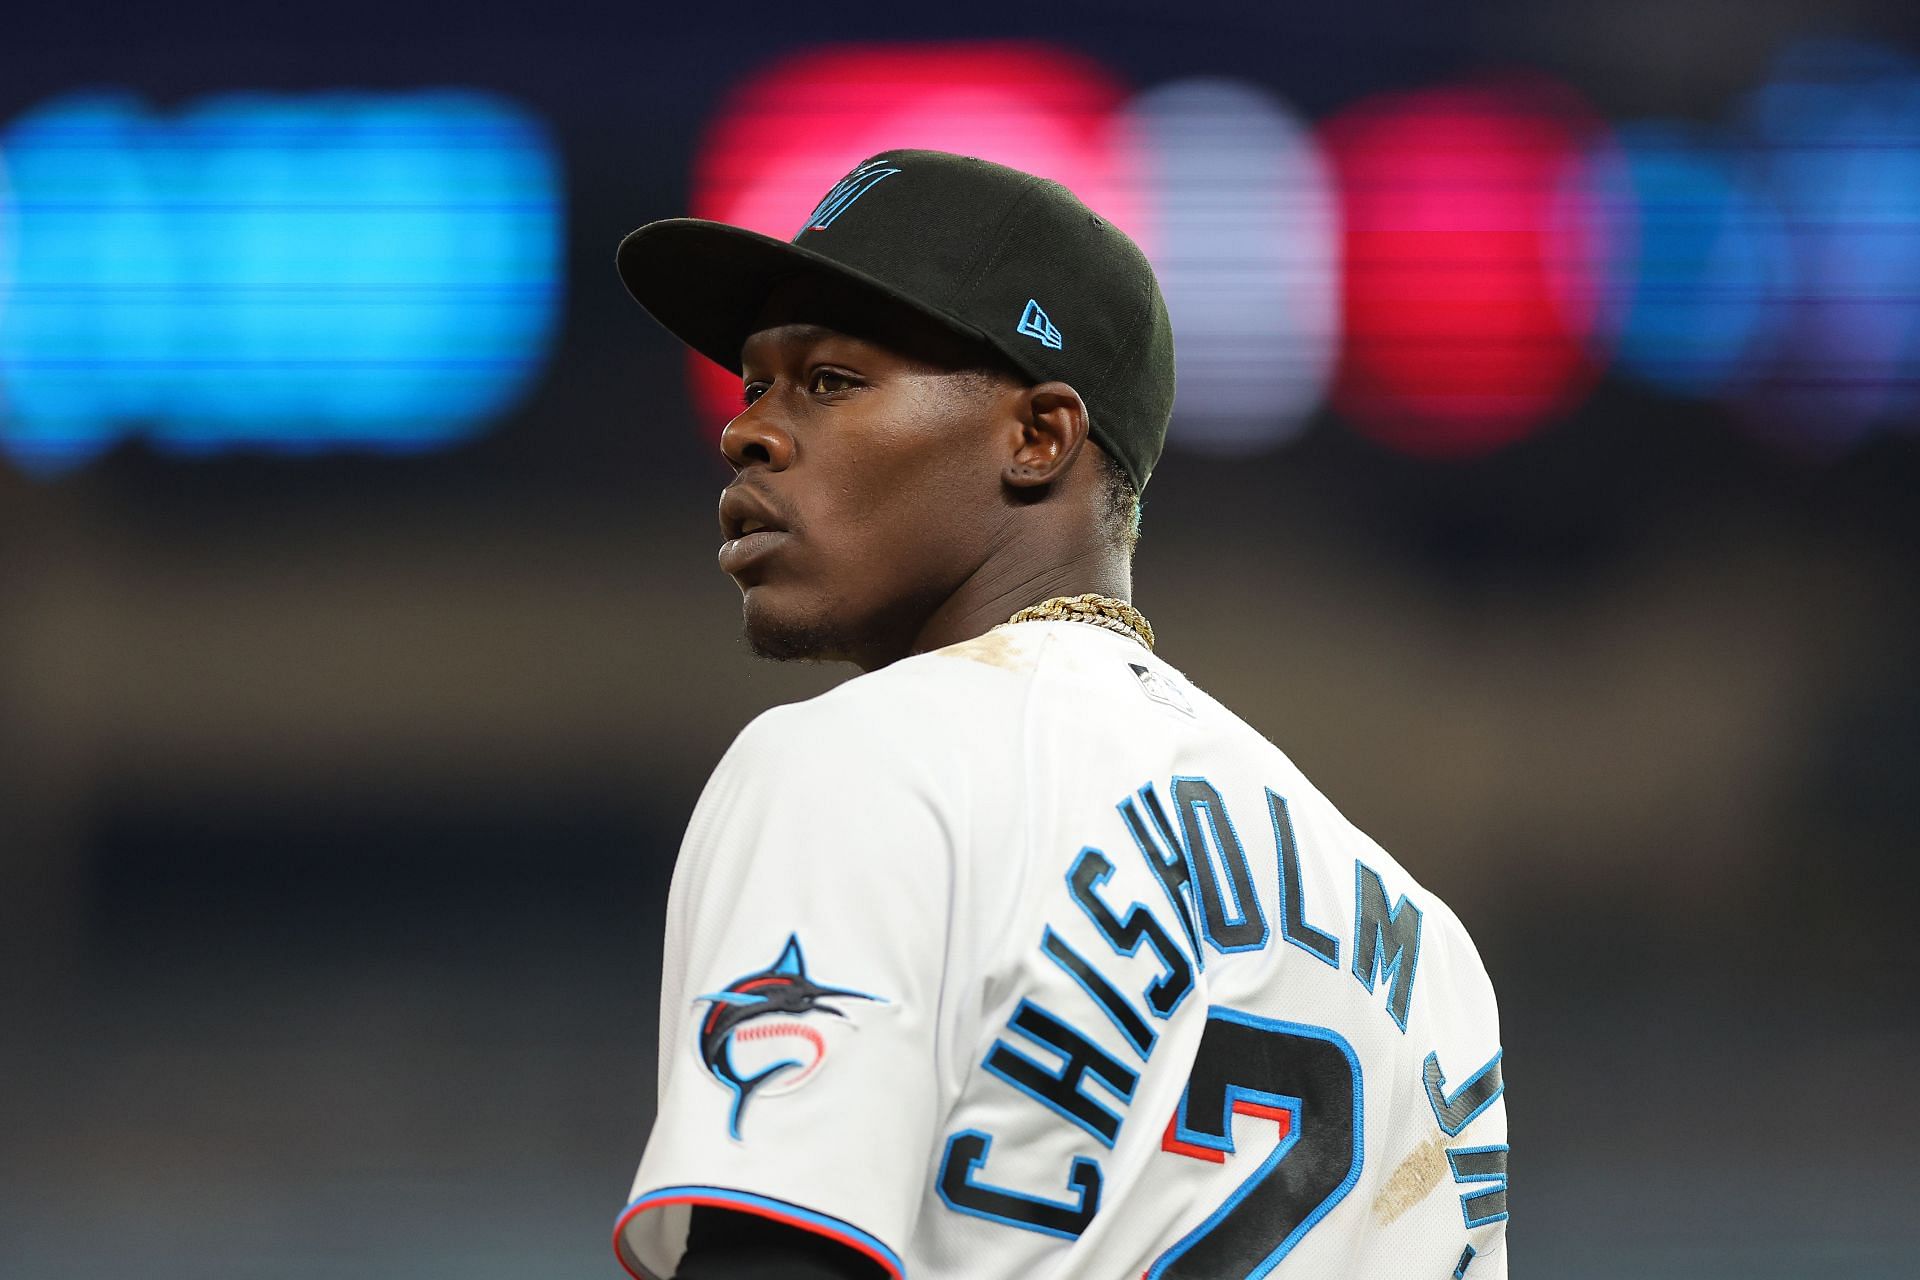 Can Marlins trust Jazz Chisholm Jr. to be face of their franchise